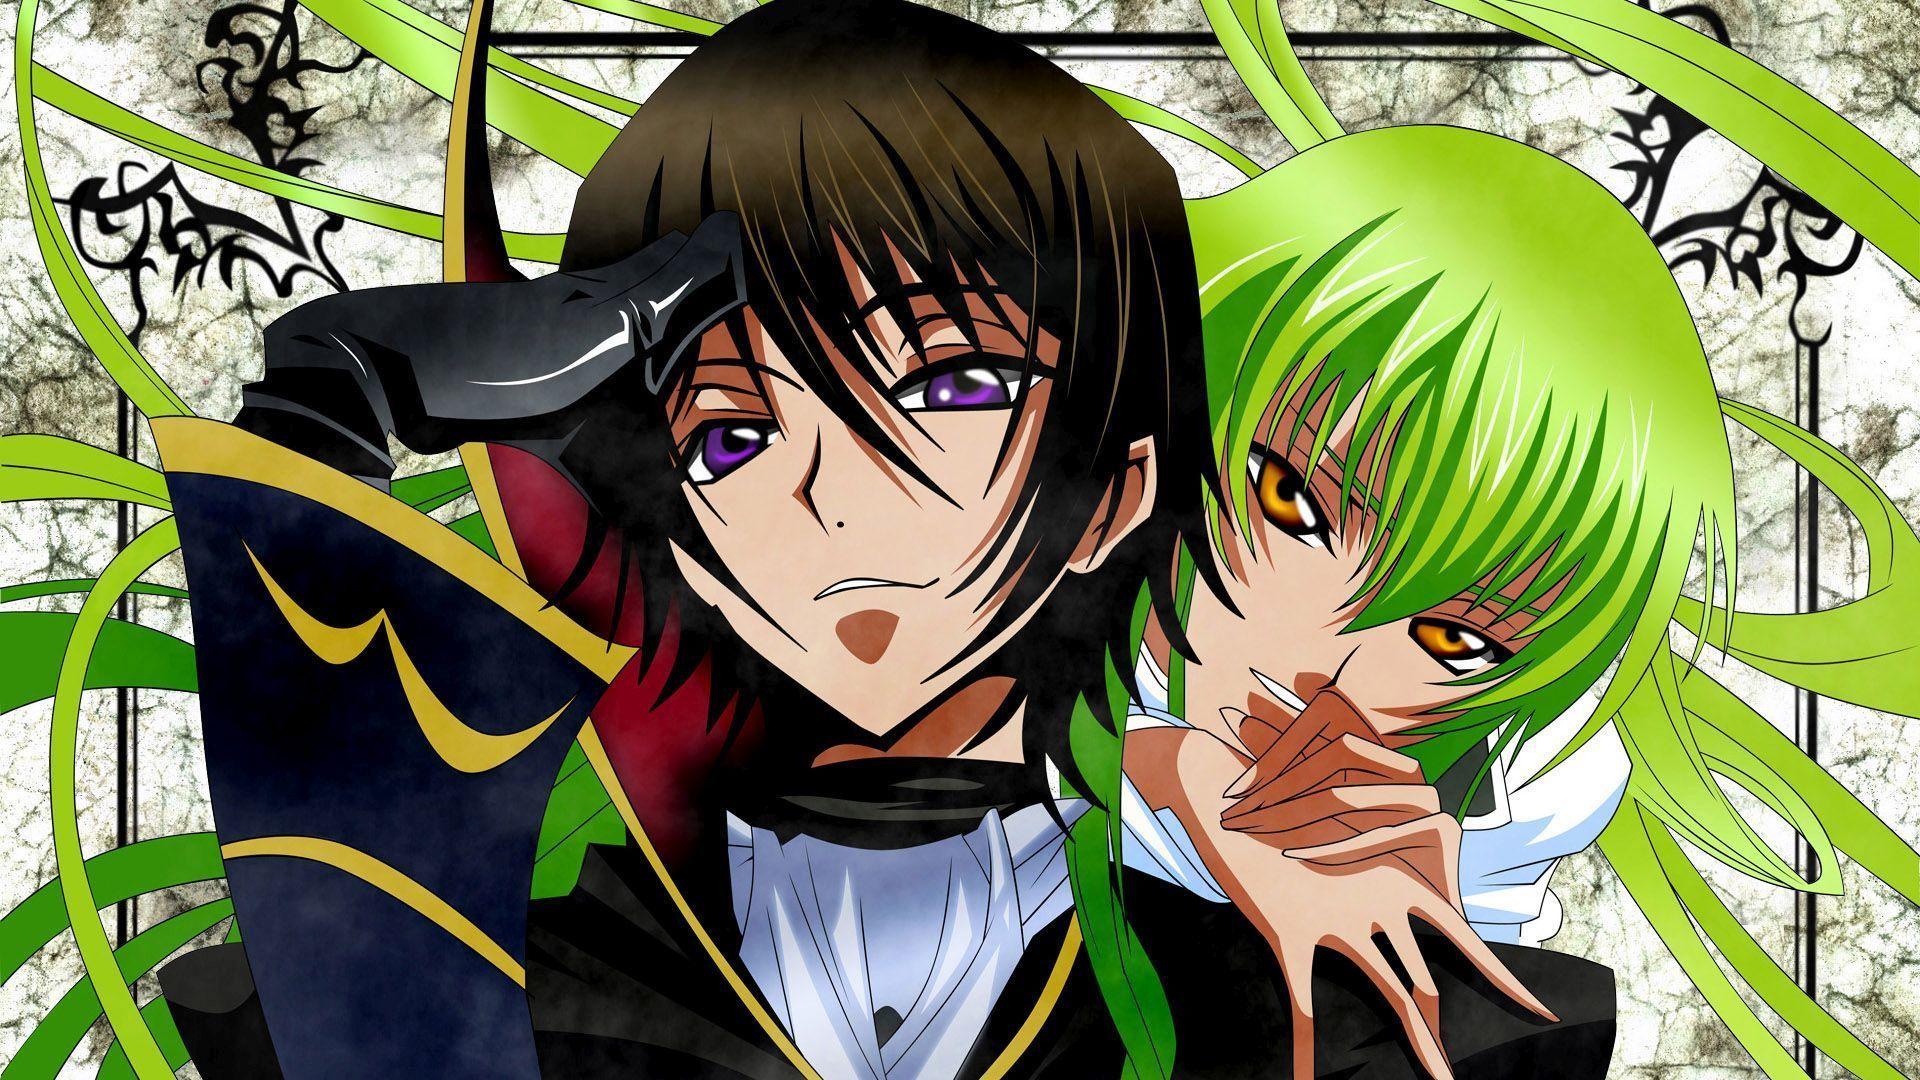 C.C. and Lelouch Lamperouge Geass wallpaper